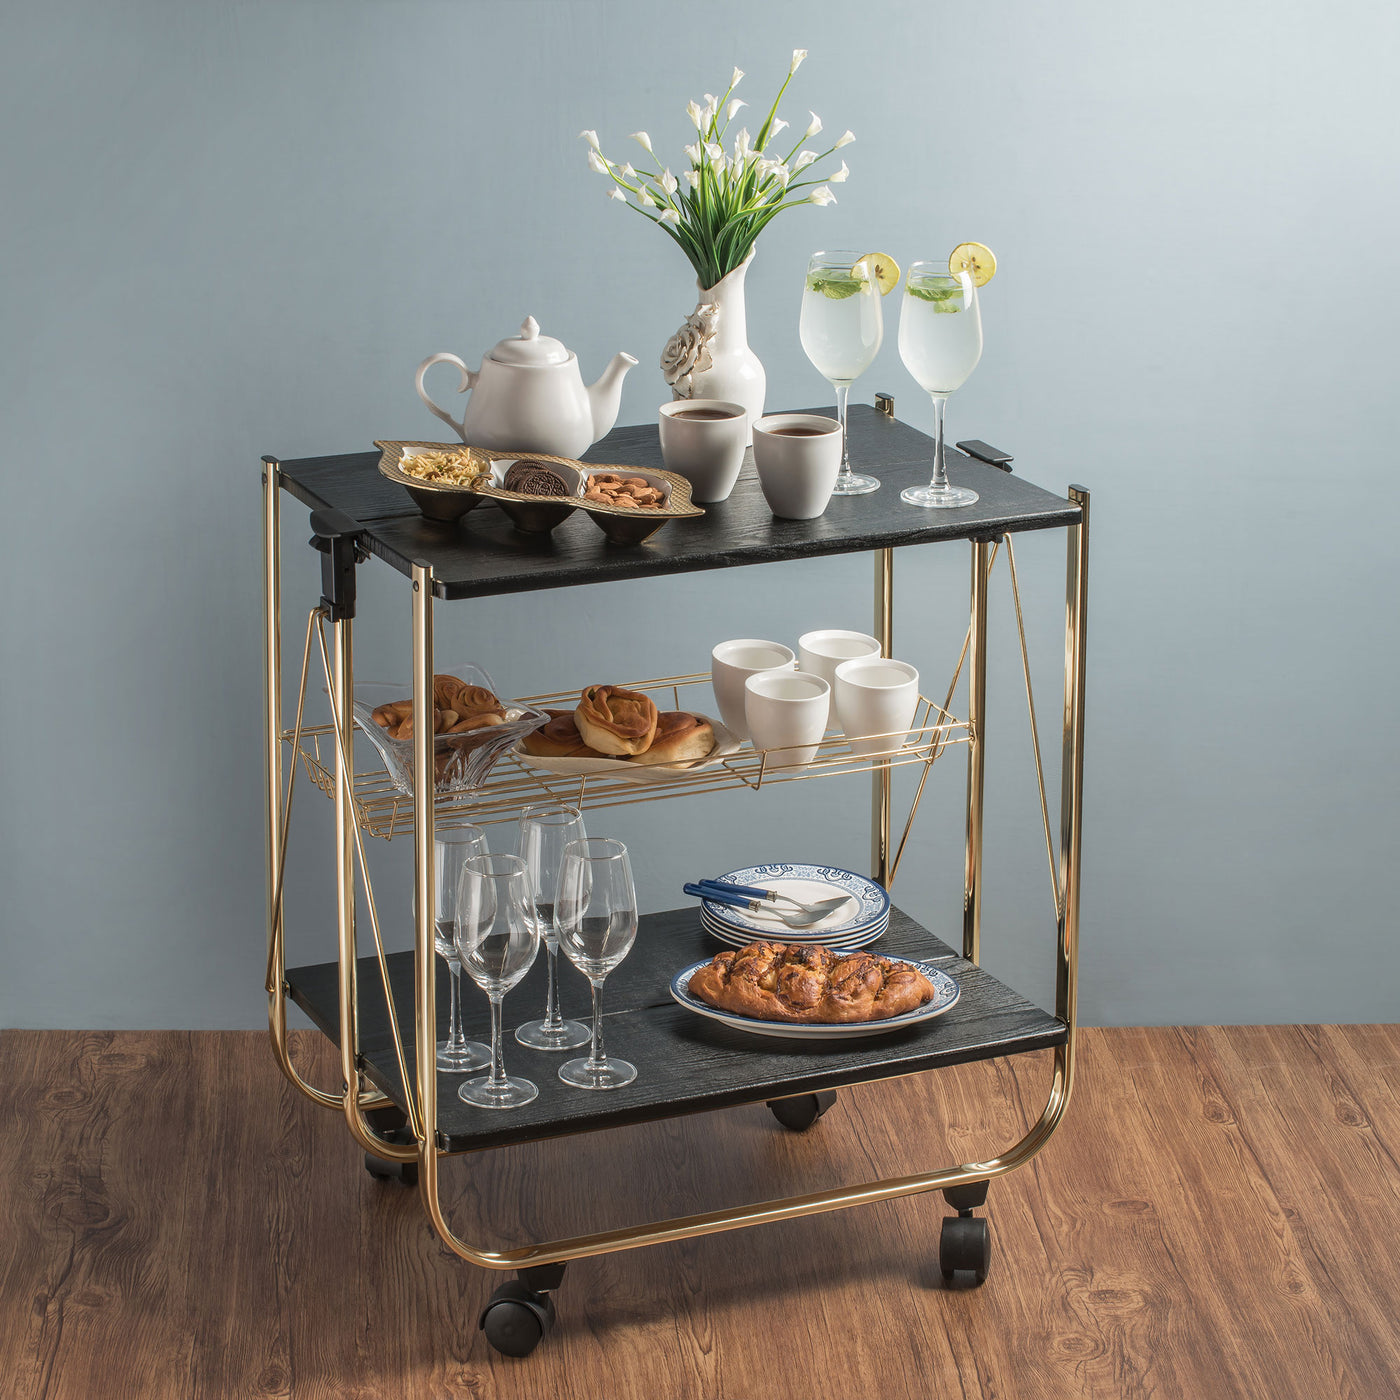 Wooden Foldable Service Trolley With Metal Frame